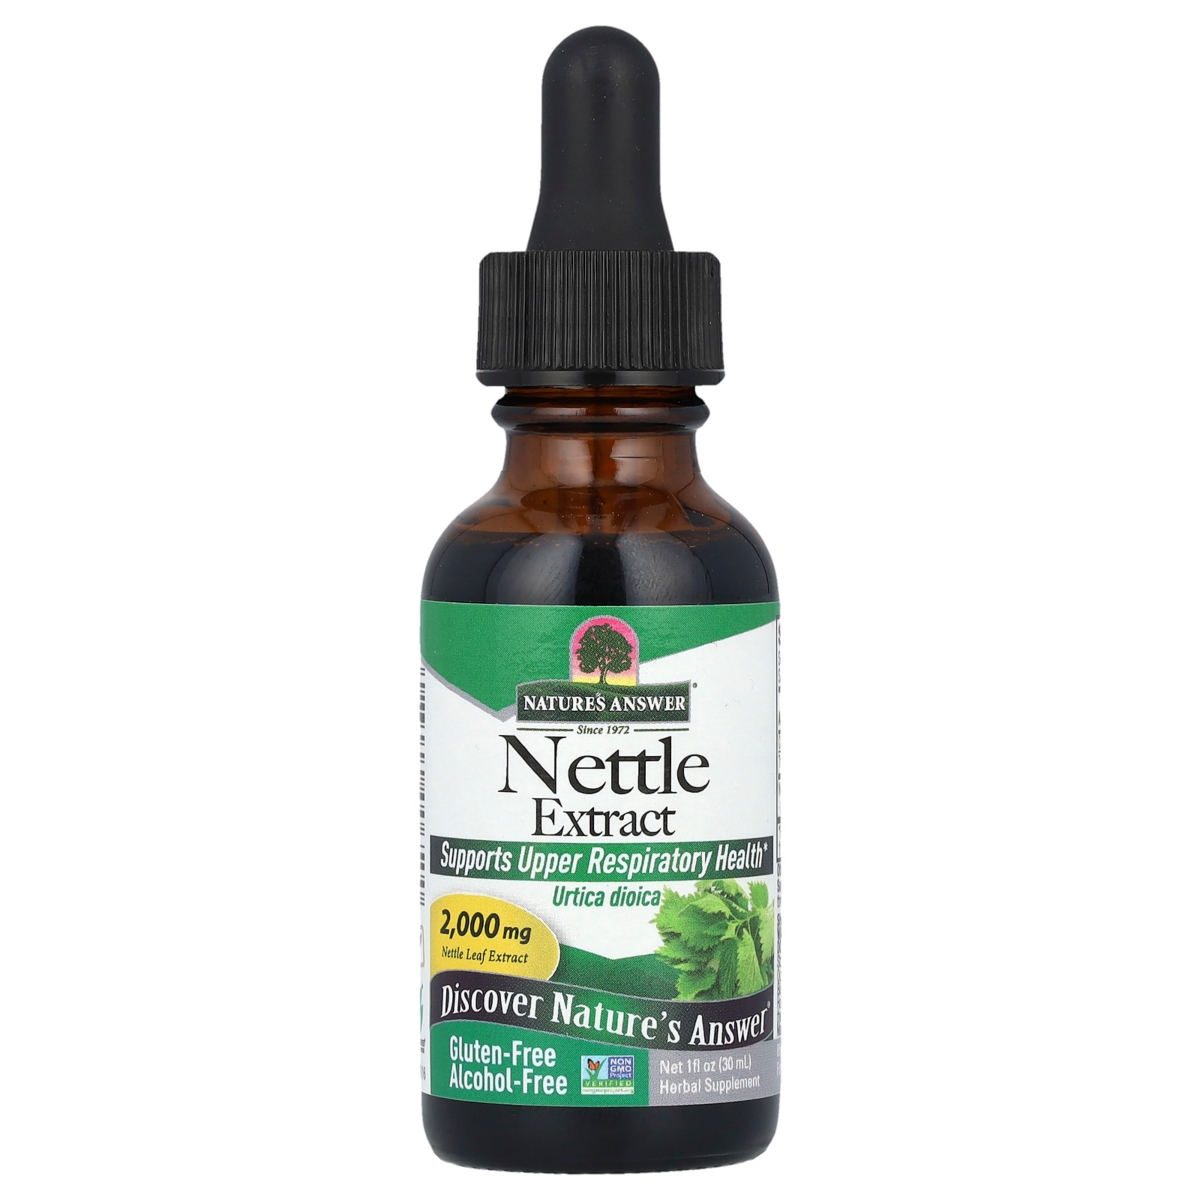 Nettle Extract 2 000 mg - 1 fl oz (30 ml) - Assorted Pre-pack (See Table